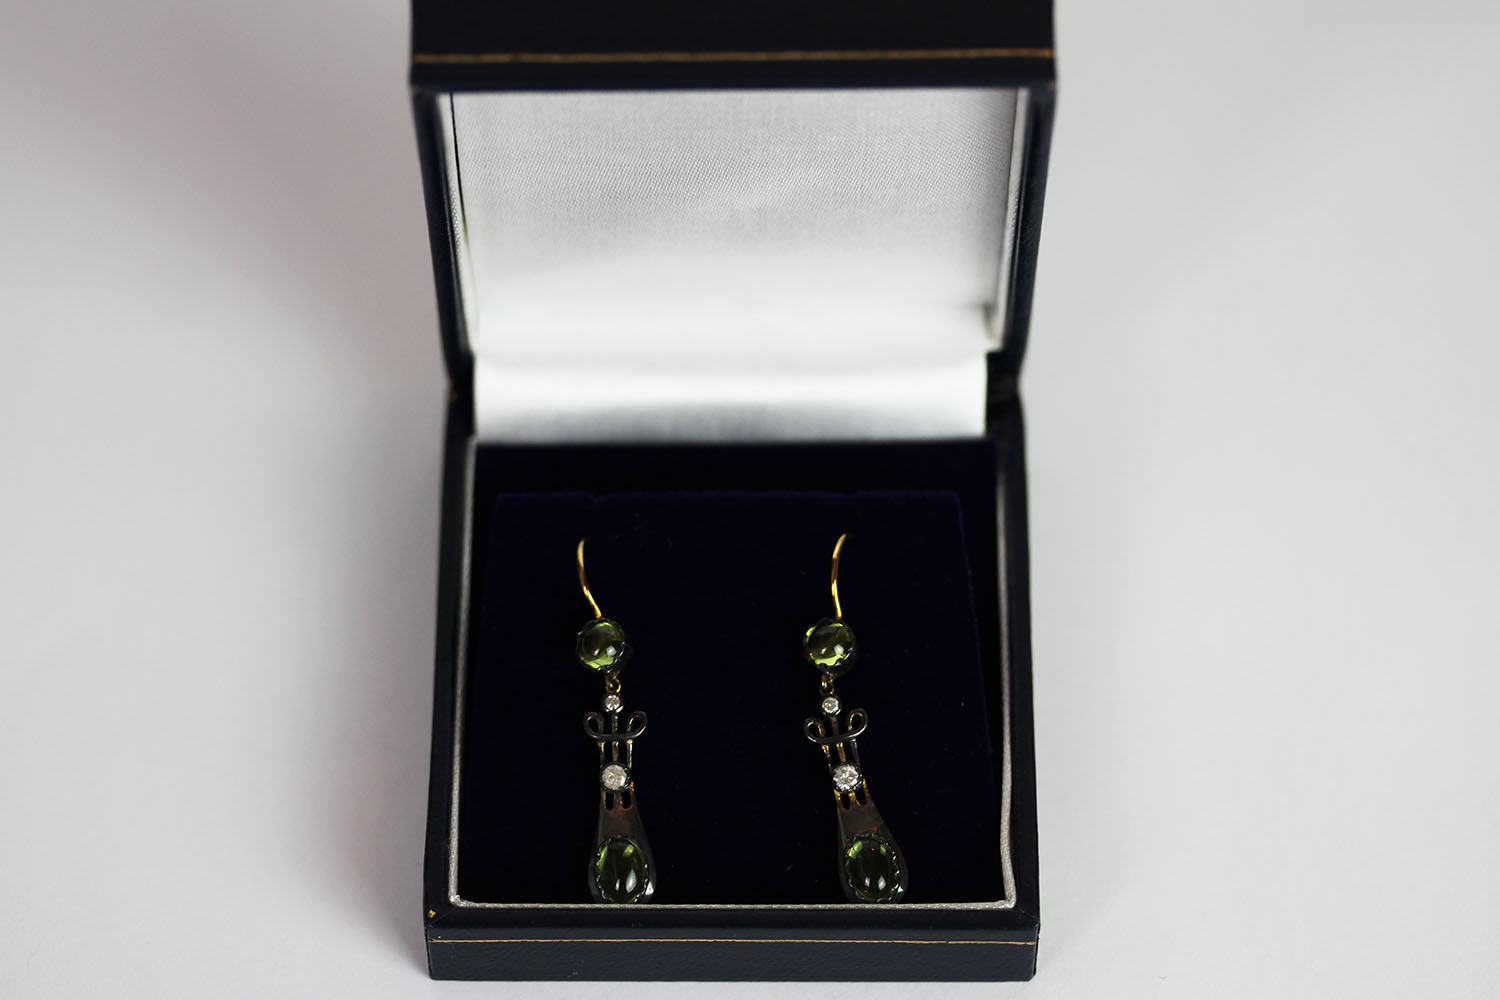 Pair of Peridot and Diamond drop earrings, each set with 2 cabochon cut peridots and 2 diamonds, - Image 3 of 3